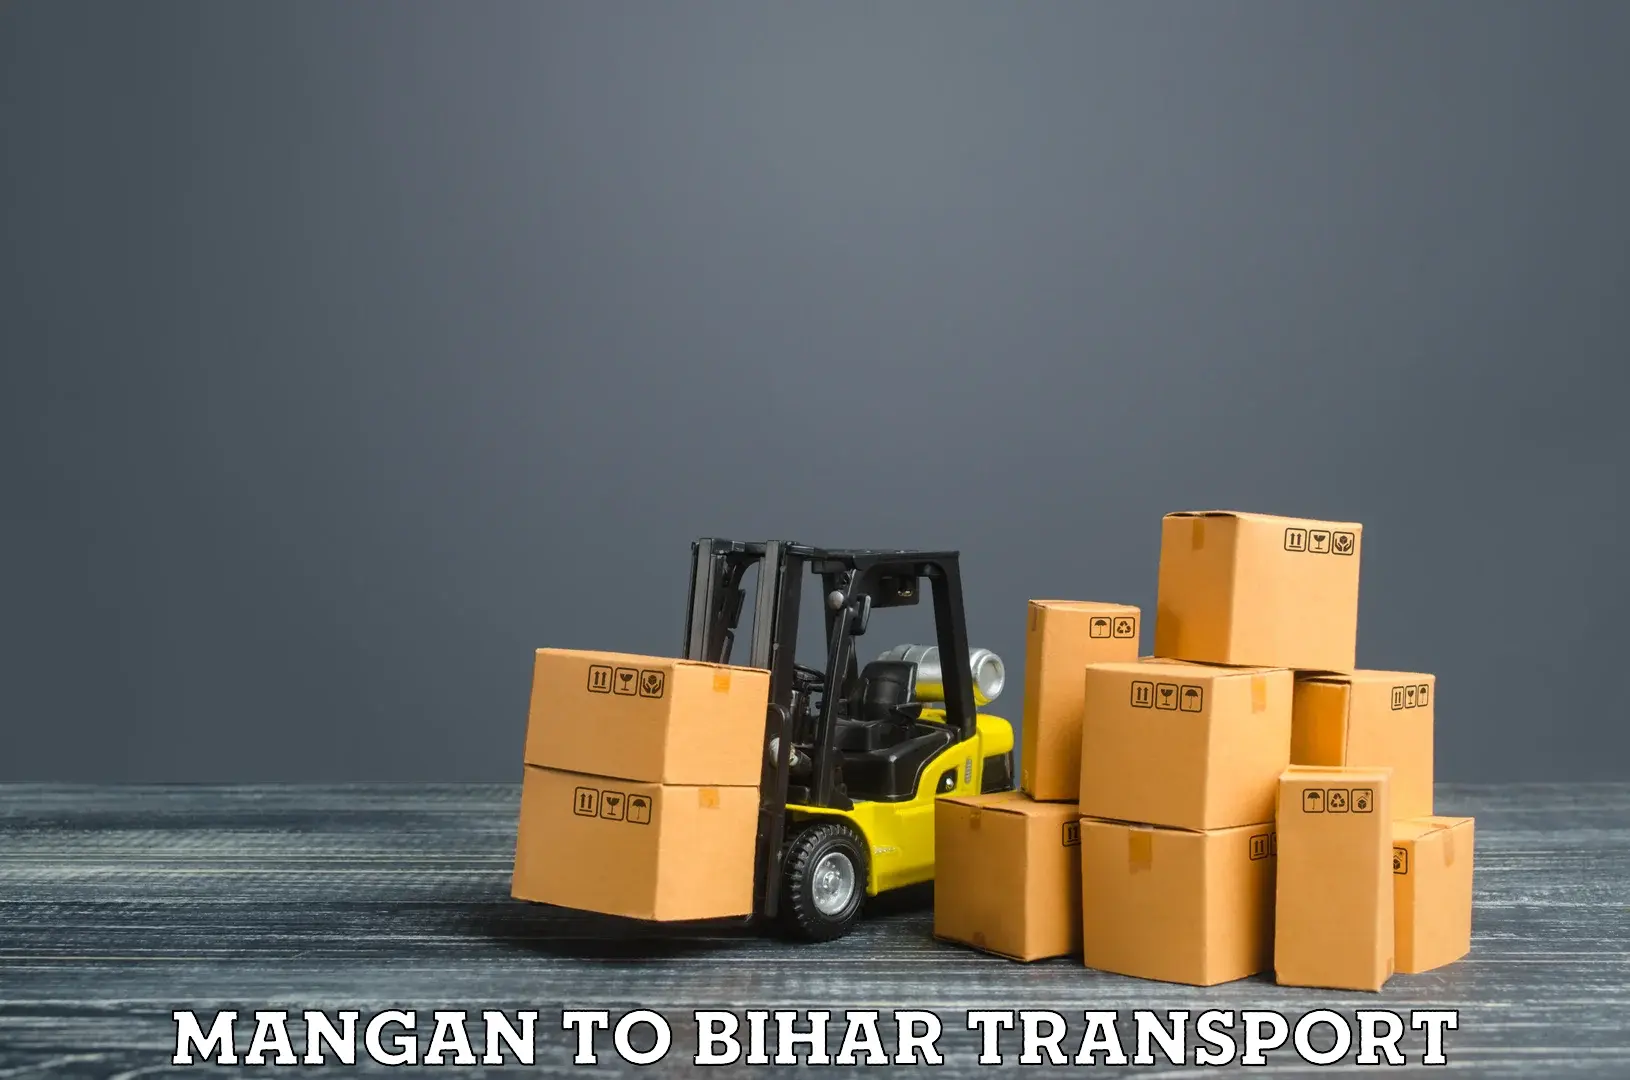 Container transport service Mangan to Kamtaul